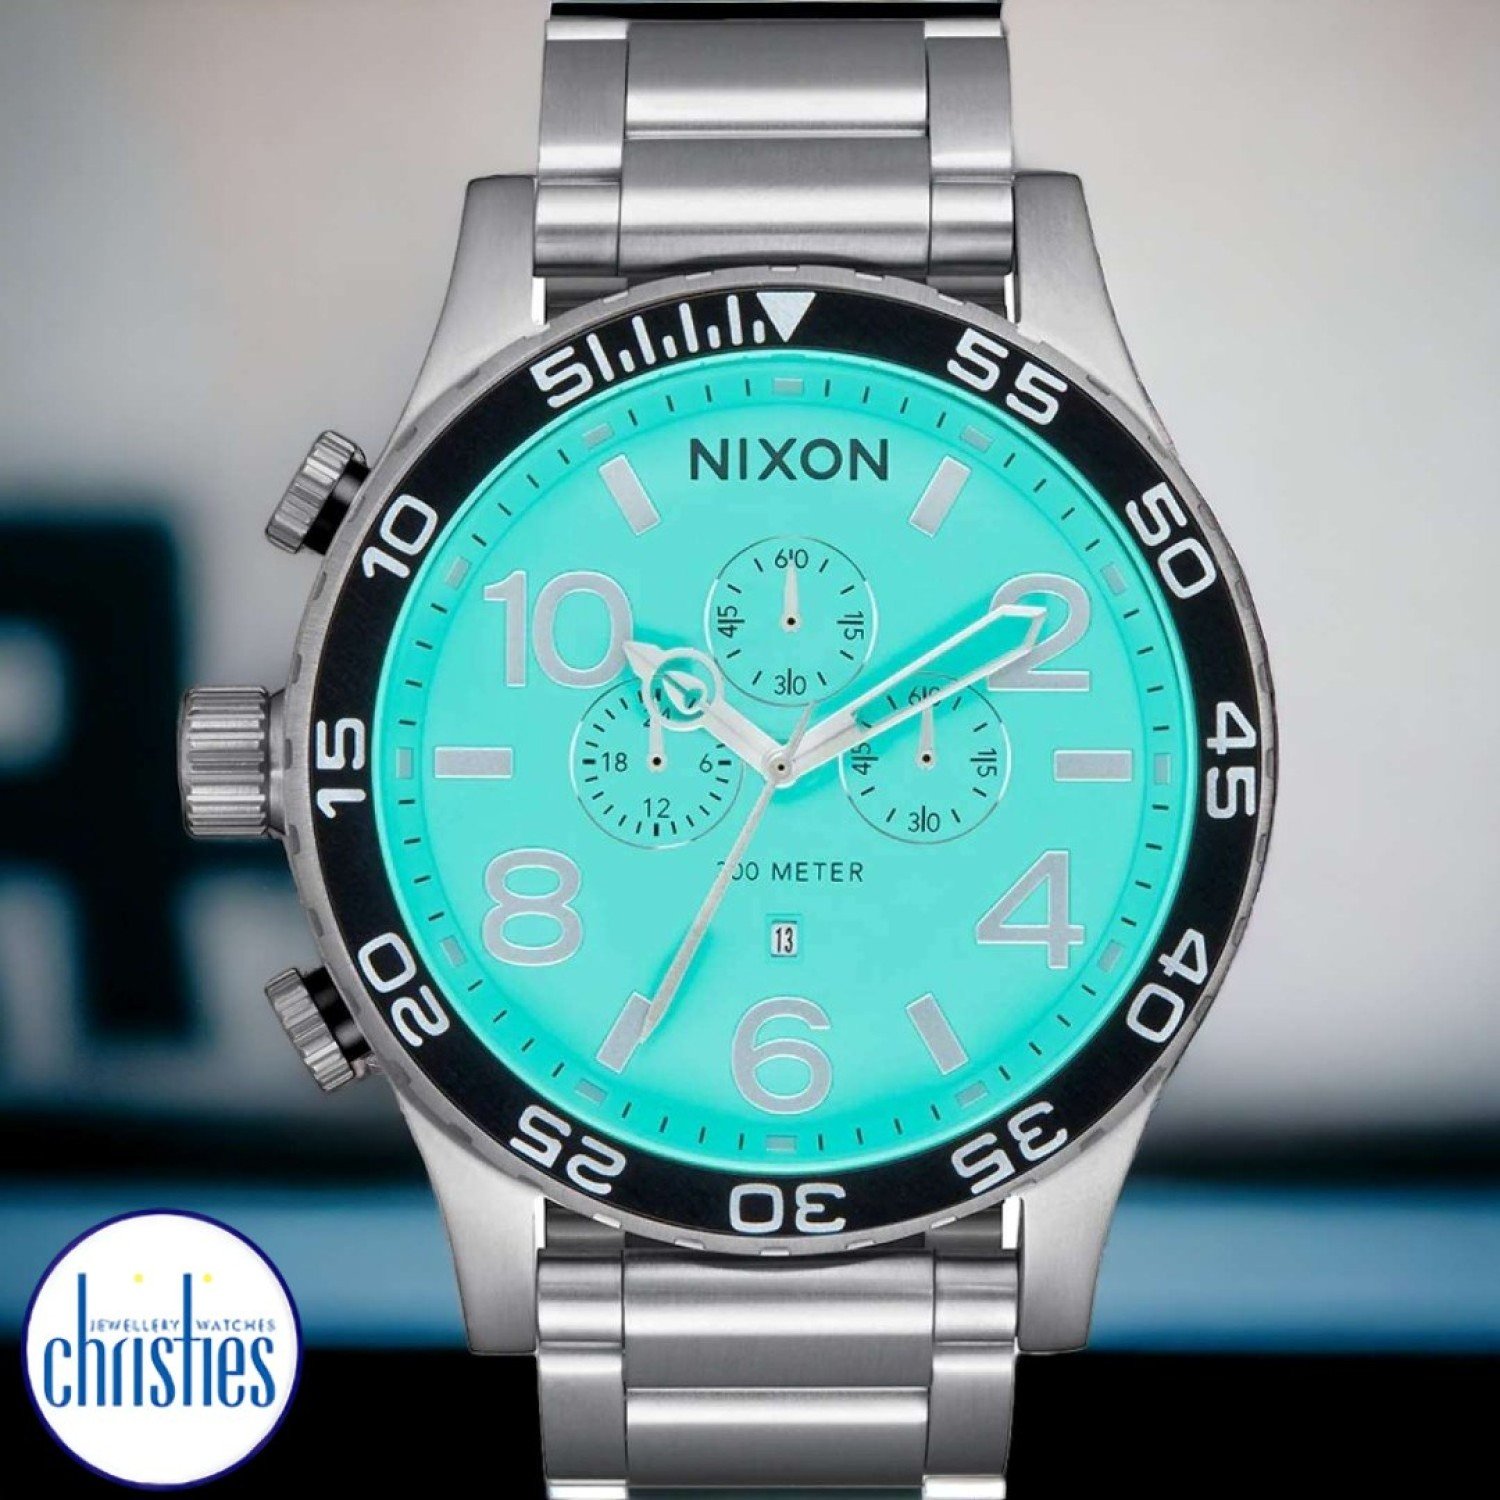 NIXON 51-30 Chrono Watch A1389-2084-00 A13892084 NIXON Watches Auckland |Nixon watches are often chosen as gifts due to their stylish designs and functionality.